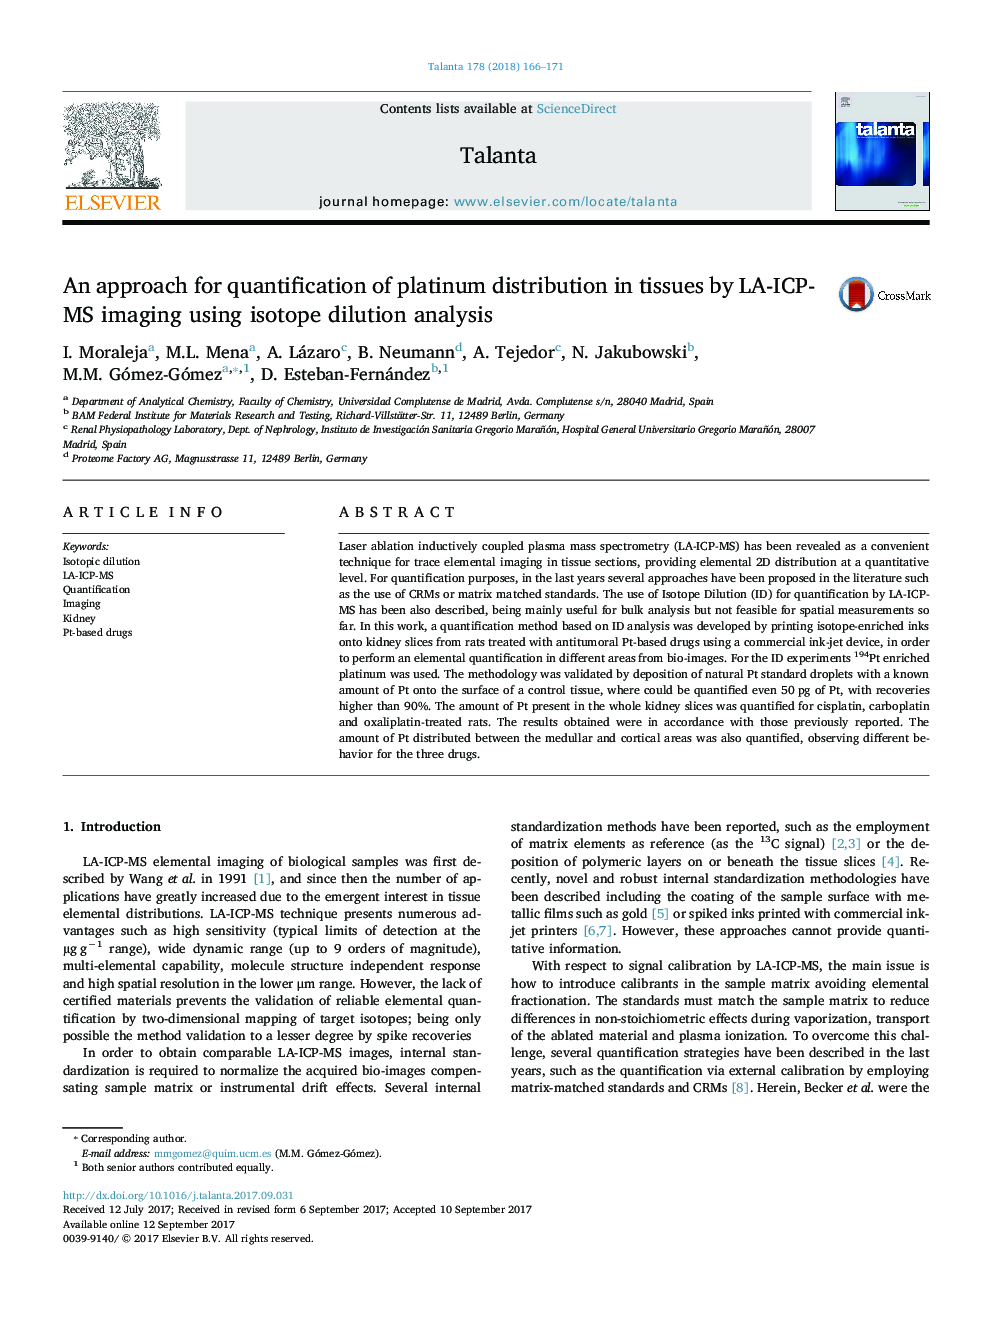 An approach for quantification of platinum distribution in tissues by LA-ICP-MS imaging using isotope dilution analysis